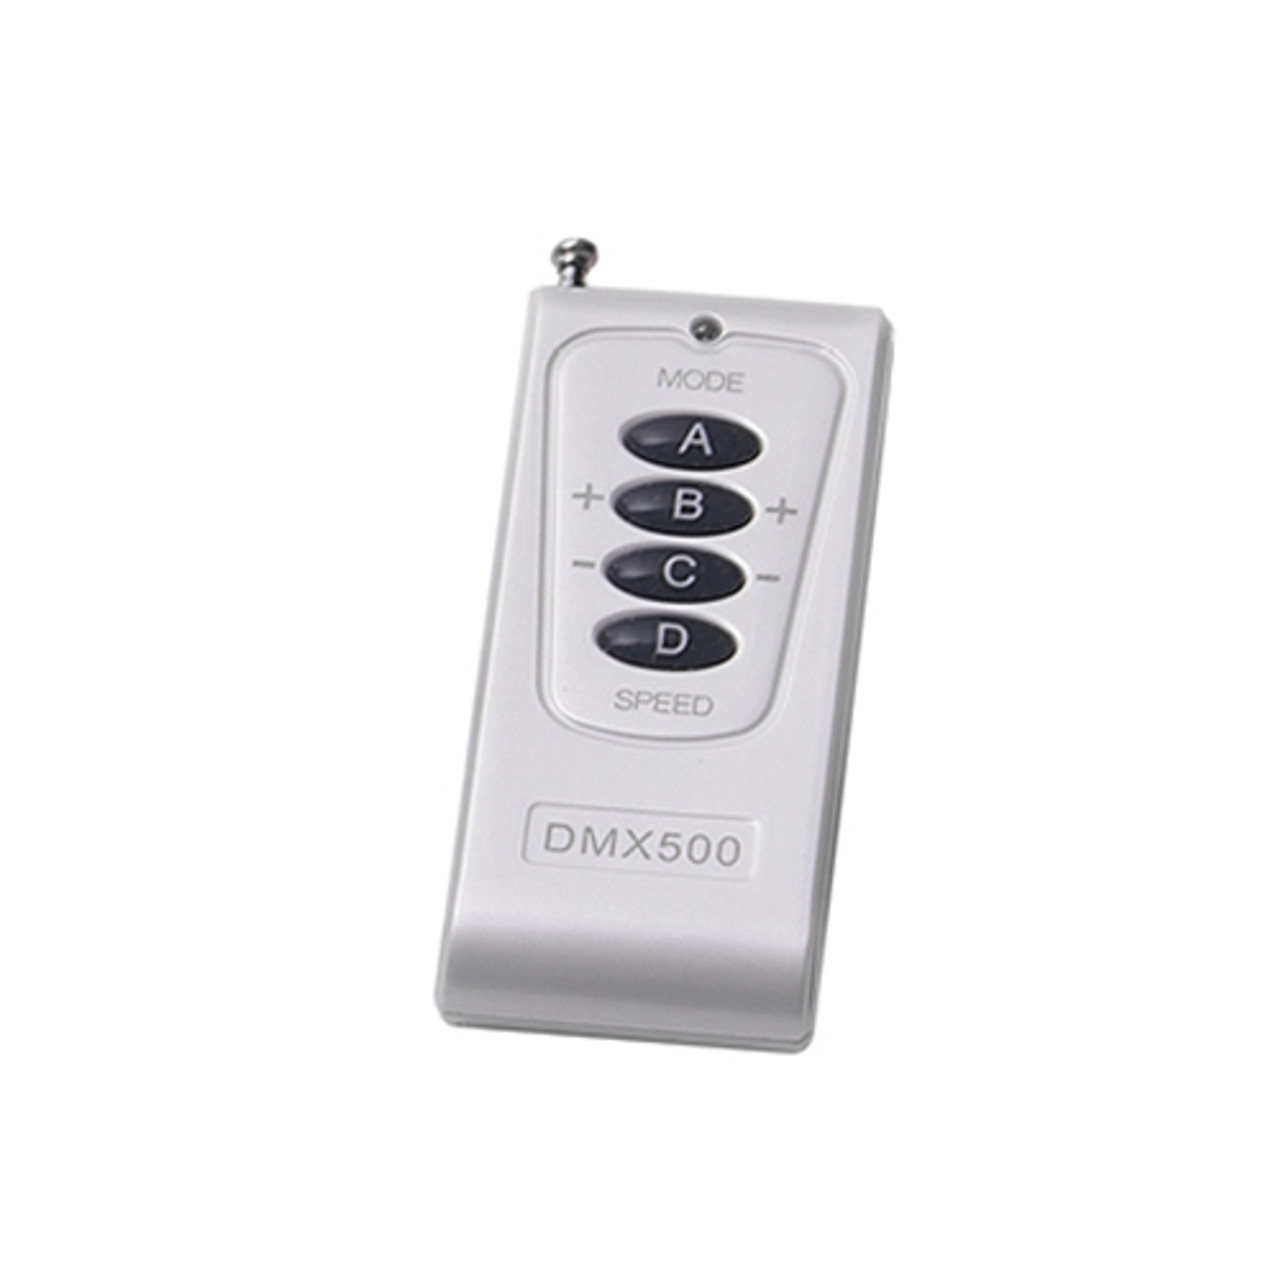 Encore DMX Remote Controller for the RGB Lights